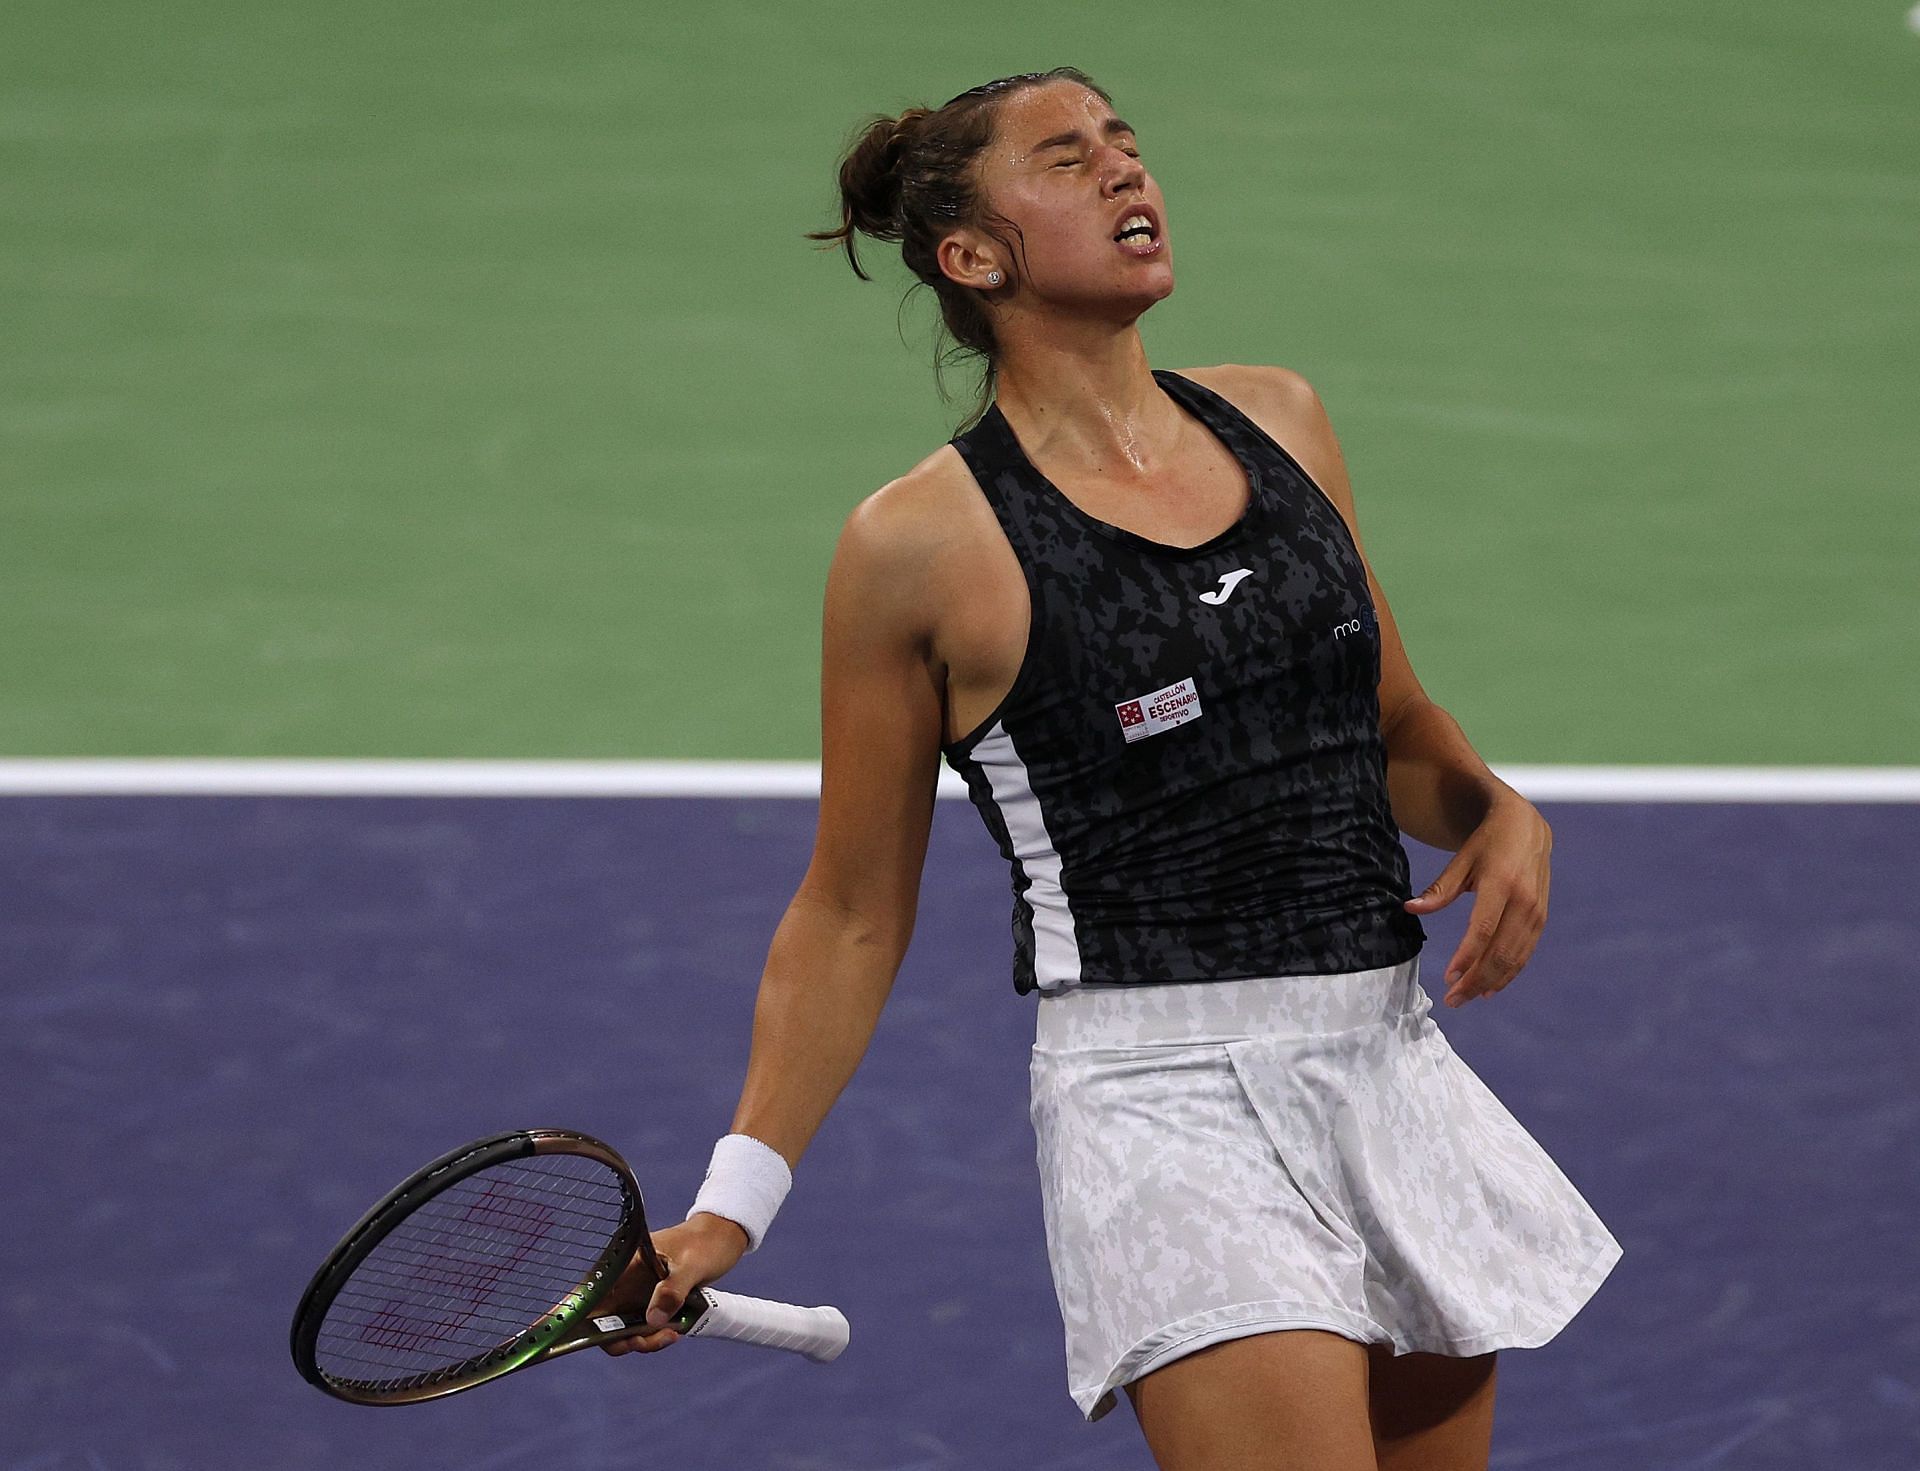 Sara Sorribes Tormo reacts after losing a point at the BNP Paribas Open